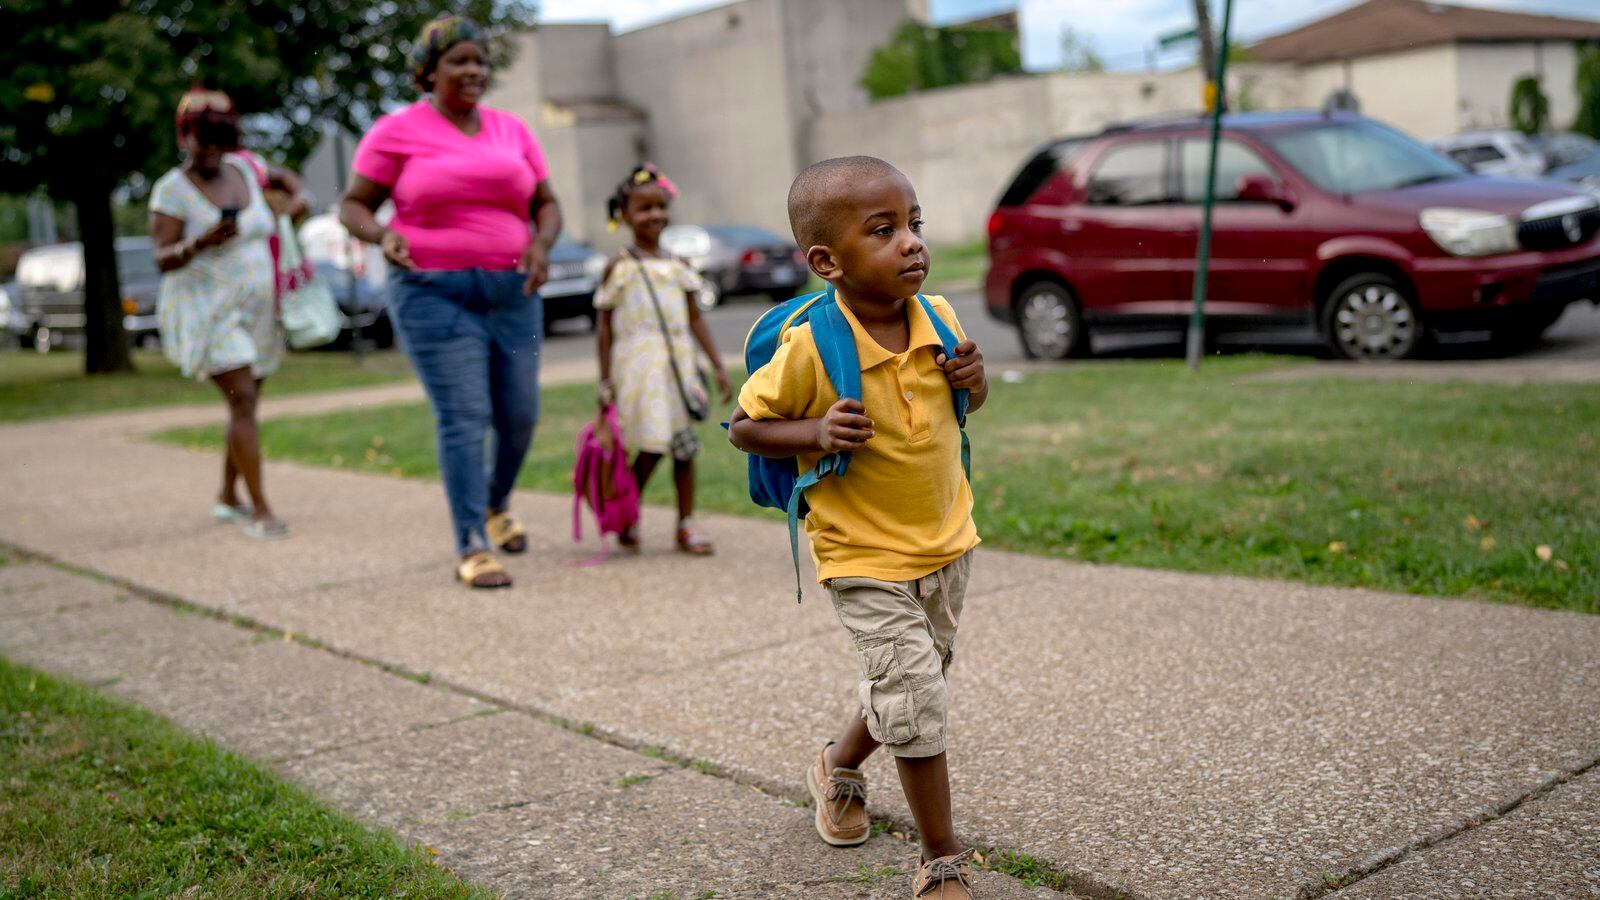 A child wearing a backpack walks toward a school building. Other children and parents can be seen behind him.